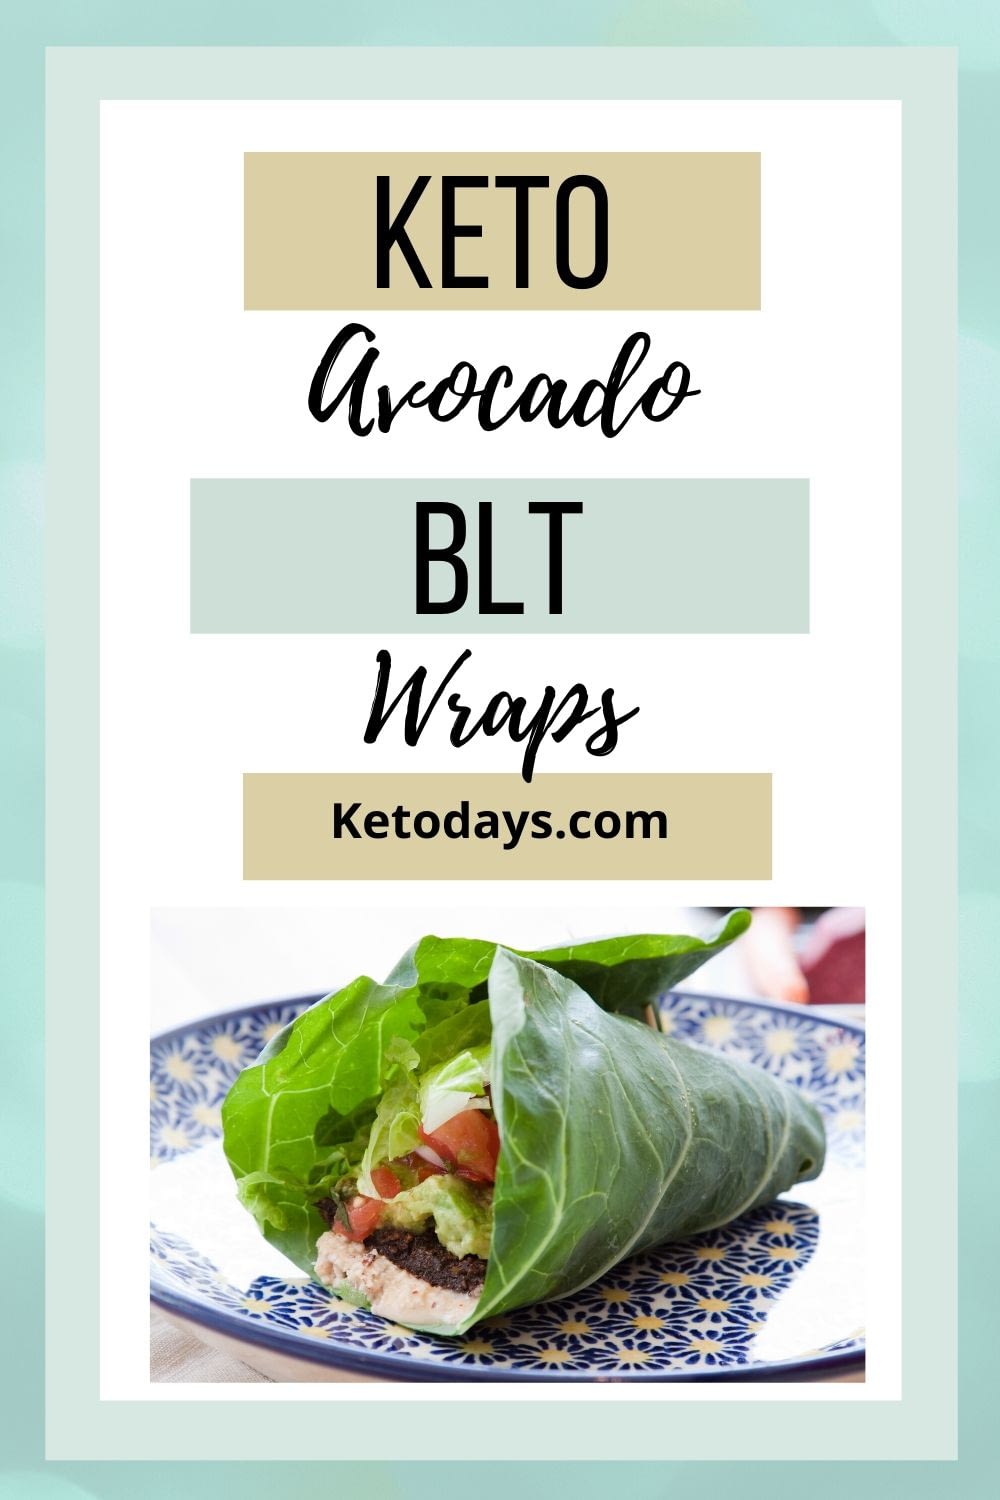 Just because you are eating Keto, doesn't mean you have to pass on sandwiches. Replace Bread with Lettuce and add your favorite fixings!